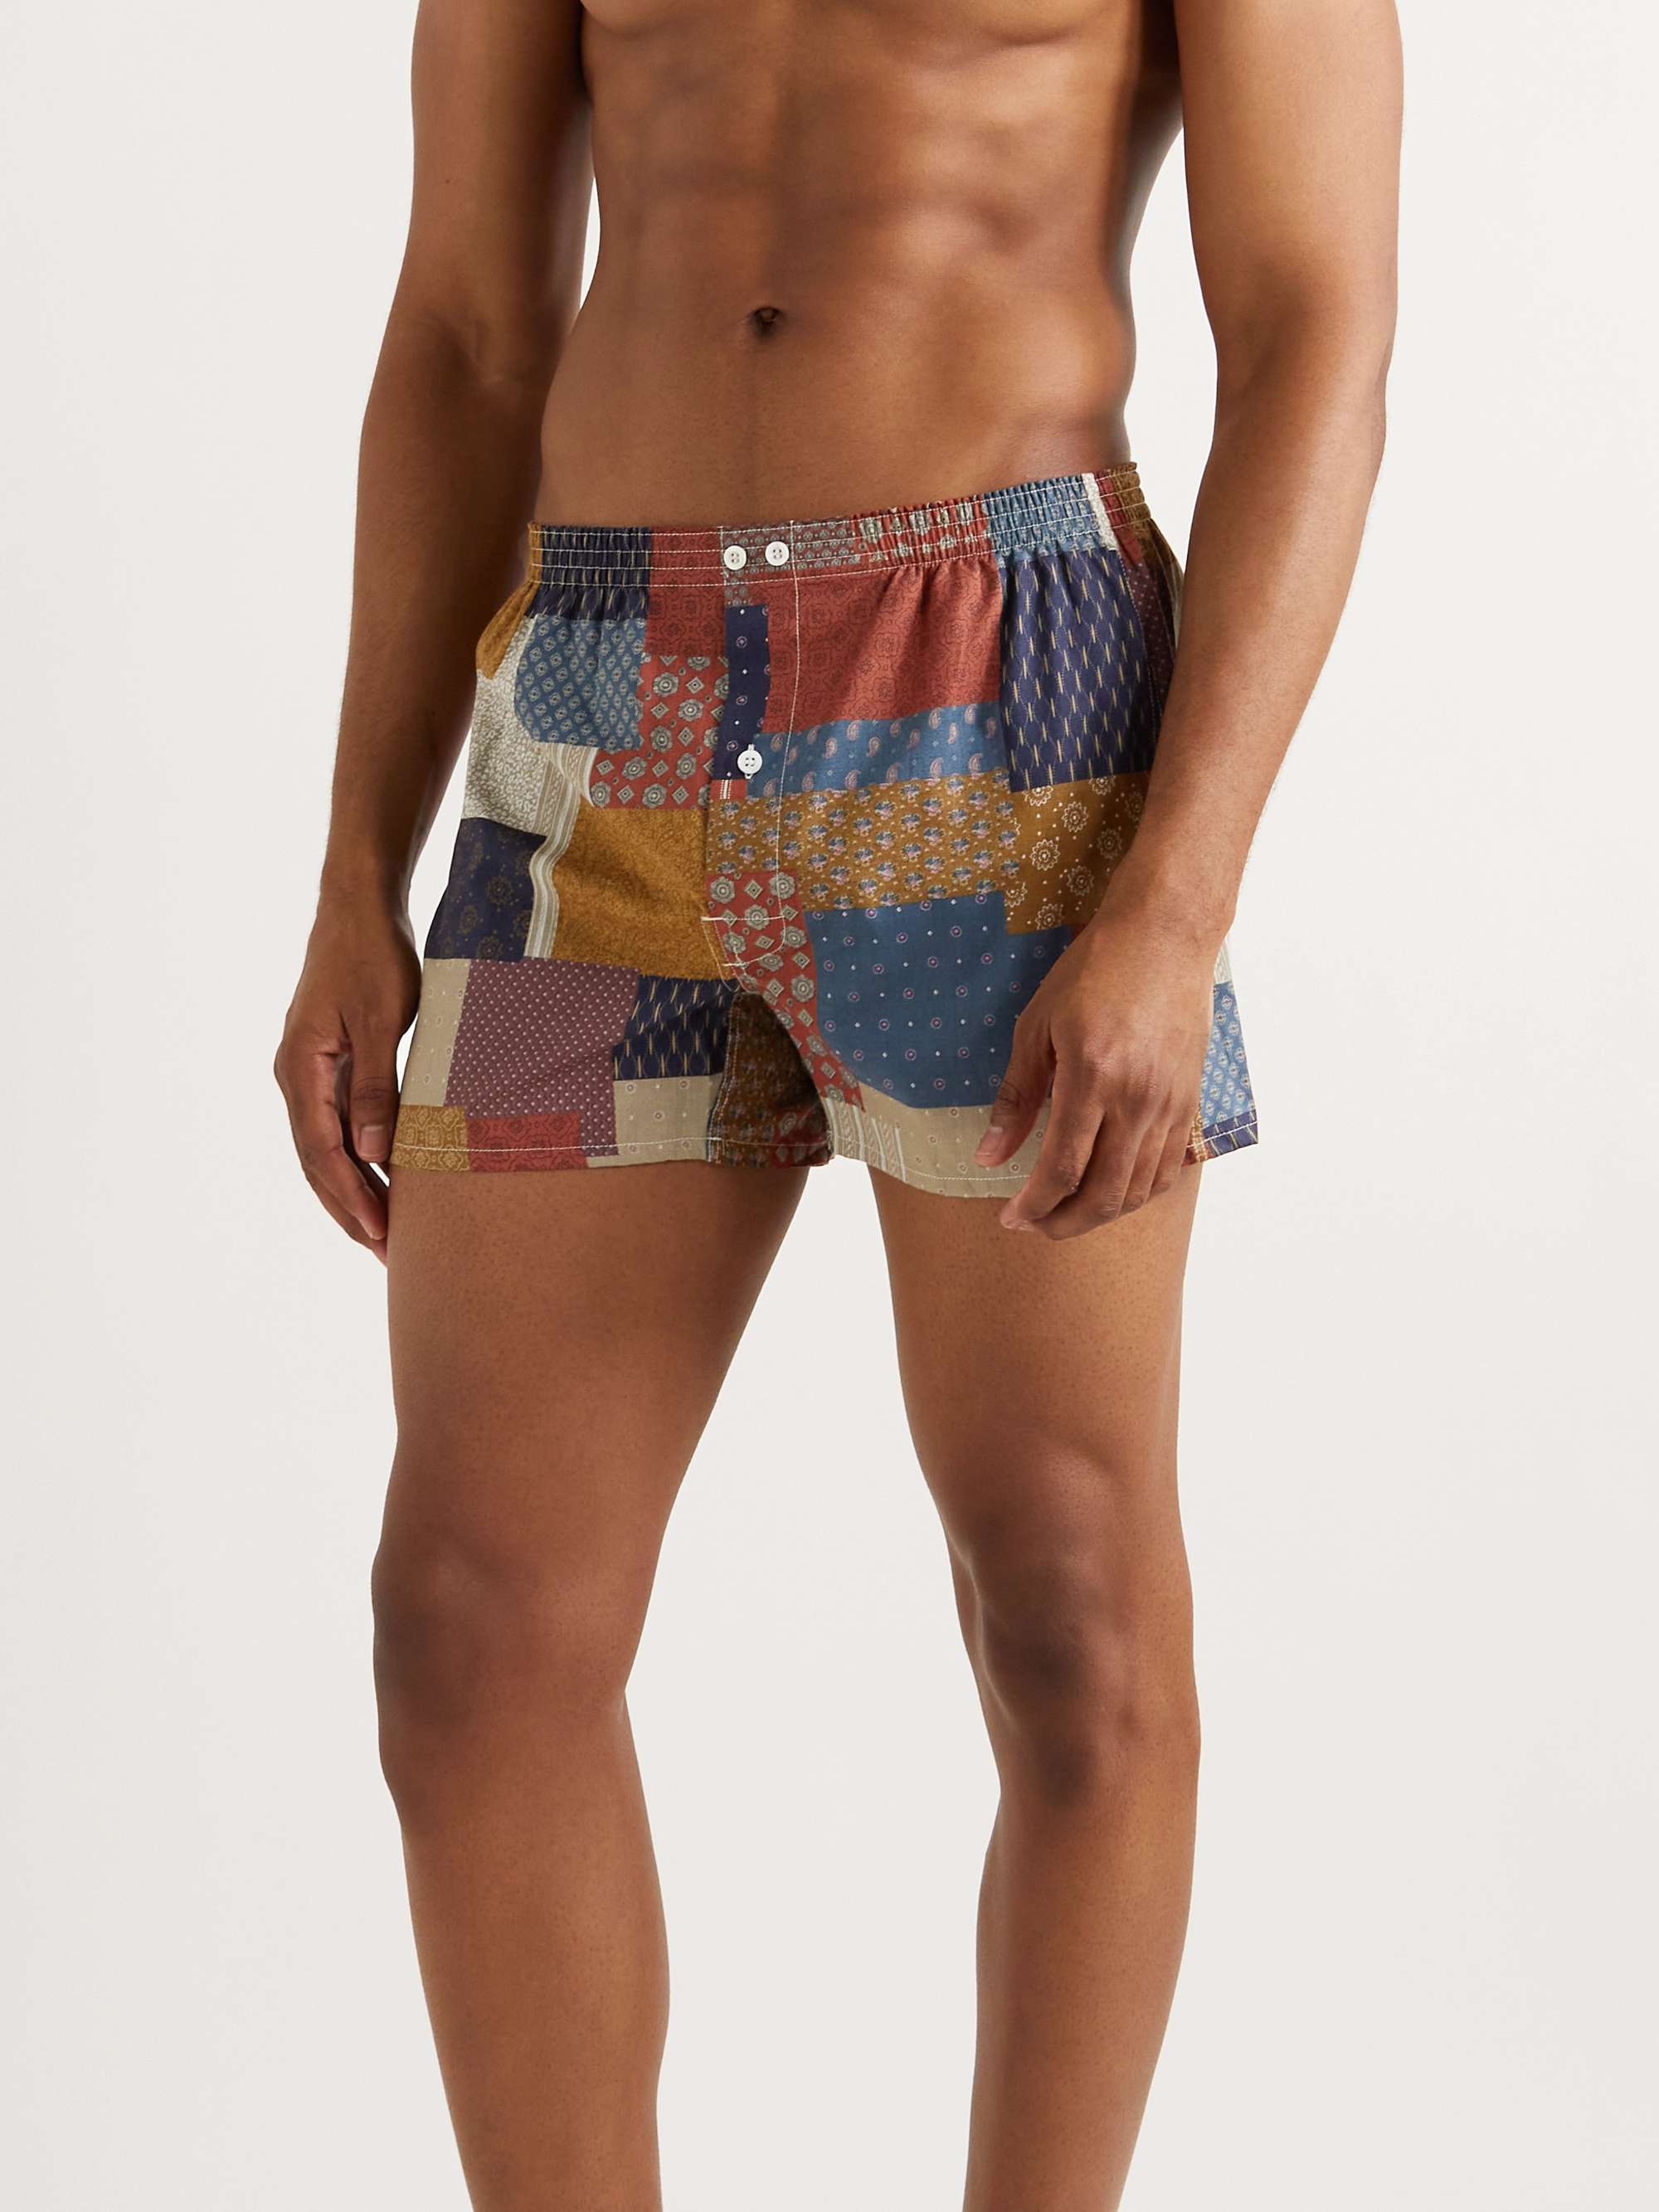 ANONYMOUS ISM Slim-Fit Printed Cotton and Linen-Blend Boxer Shorts